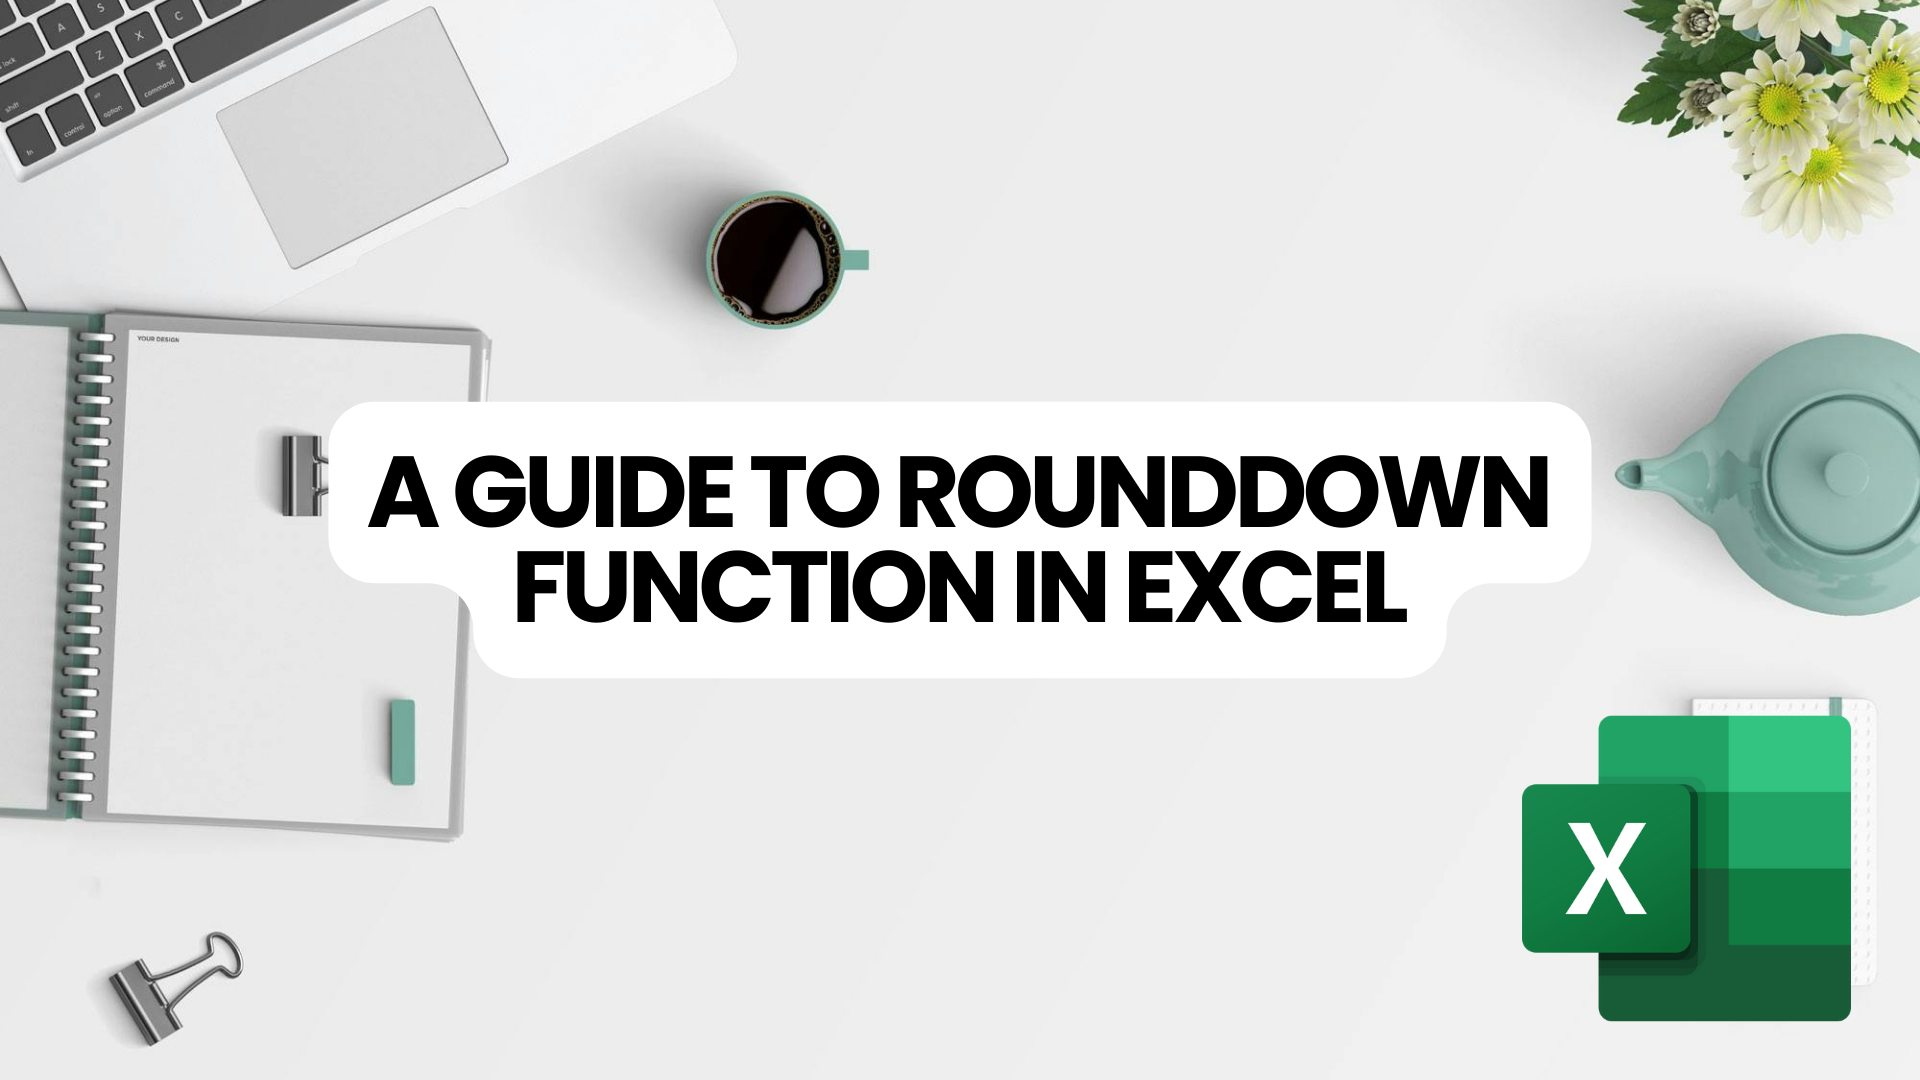 ROUNDDOWN Function in Excel